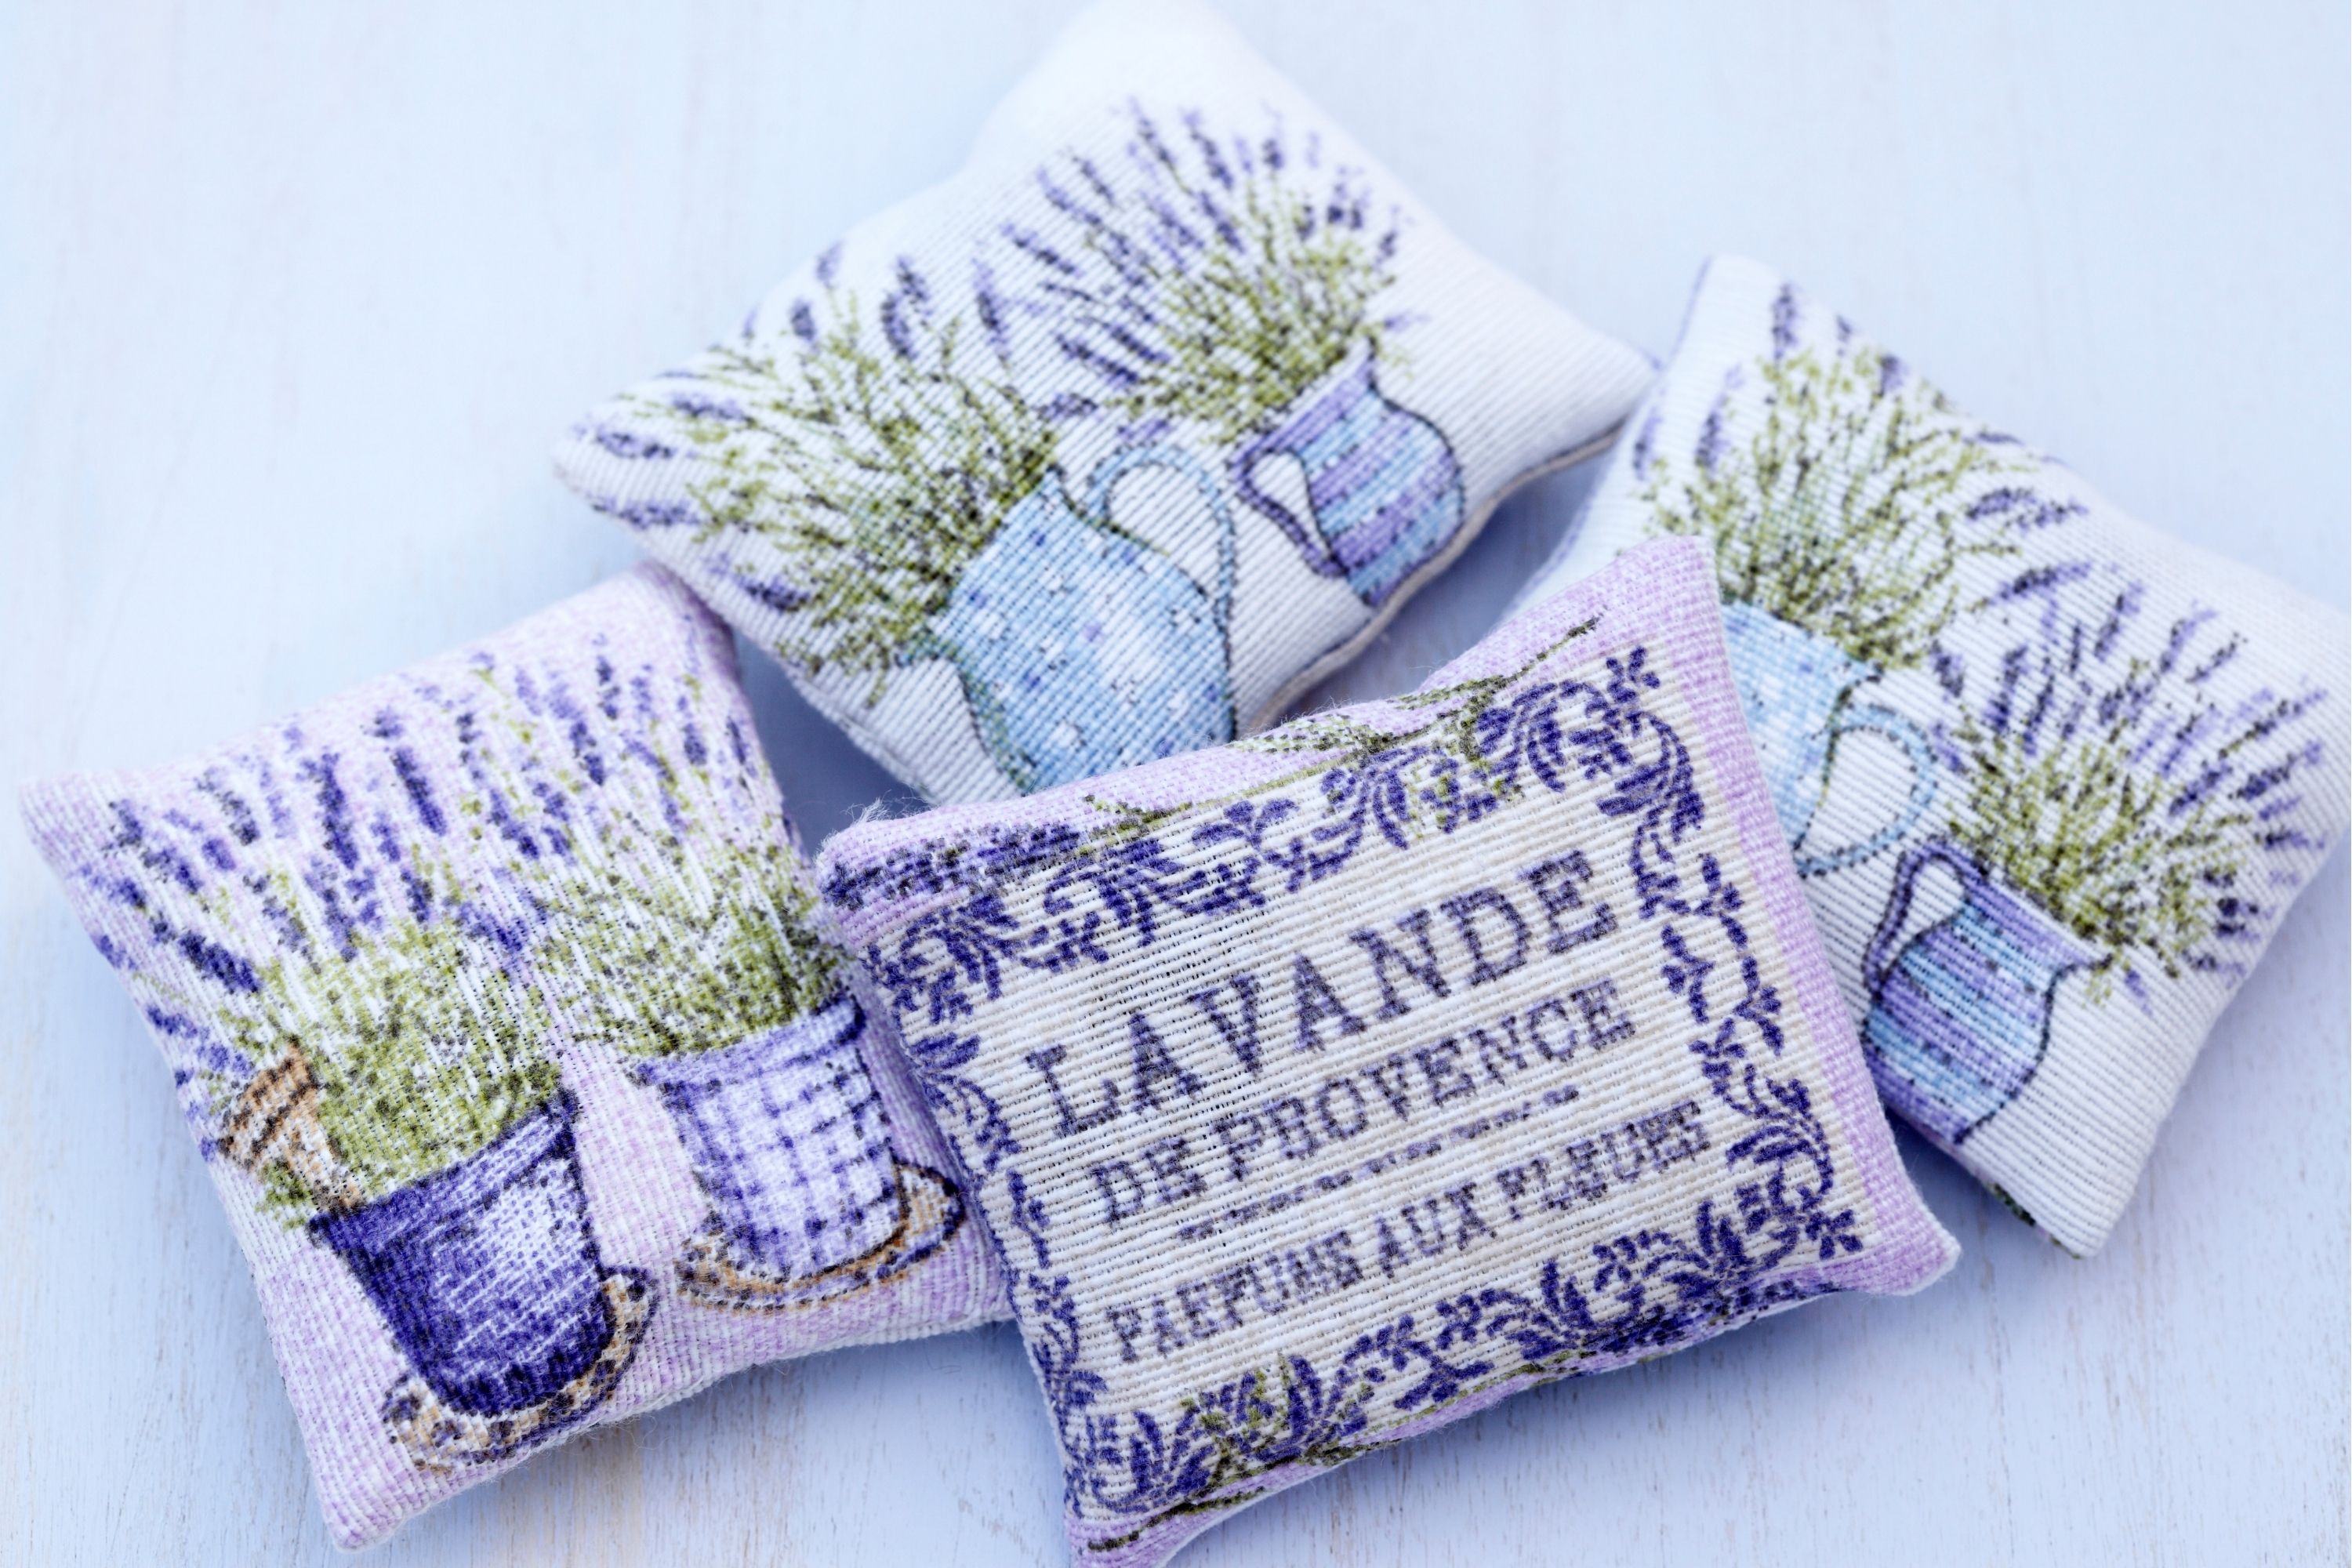 7 Reasons To Include A Lavender Pillow To Your Wellness Essentials